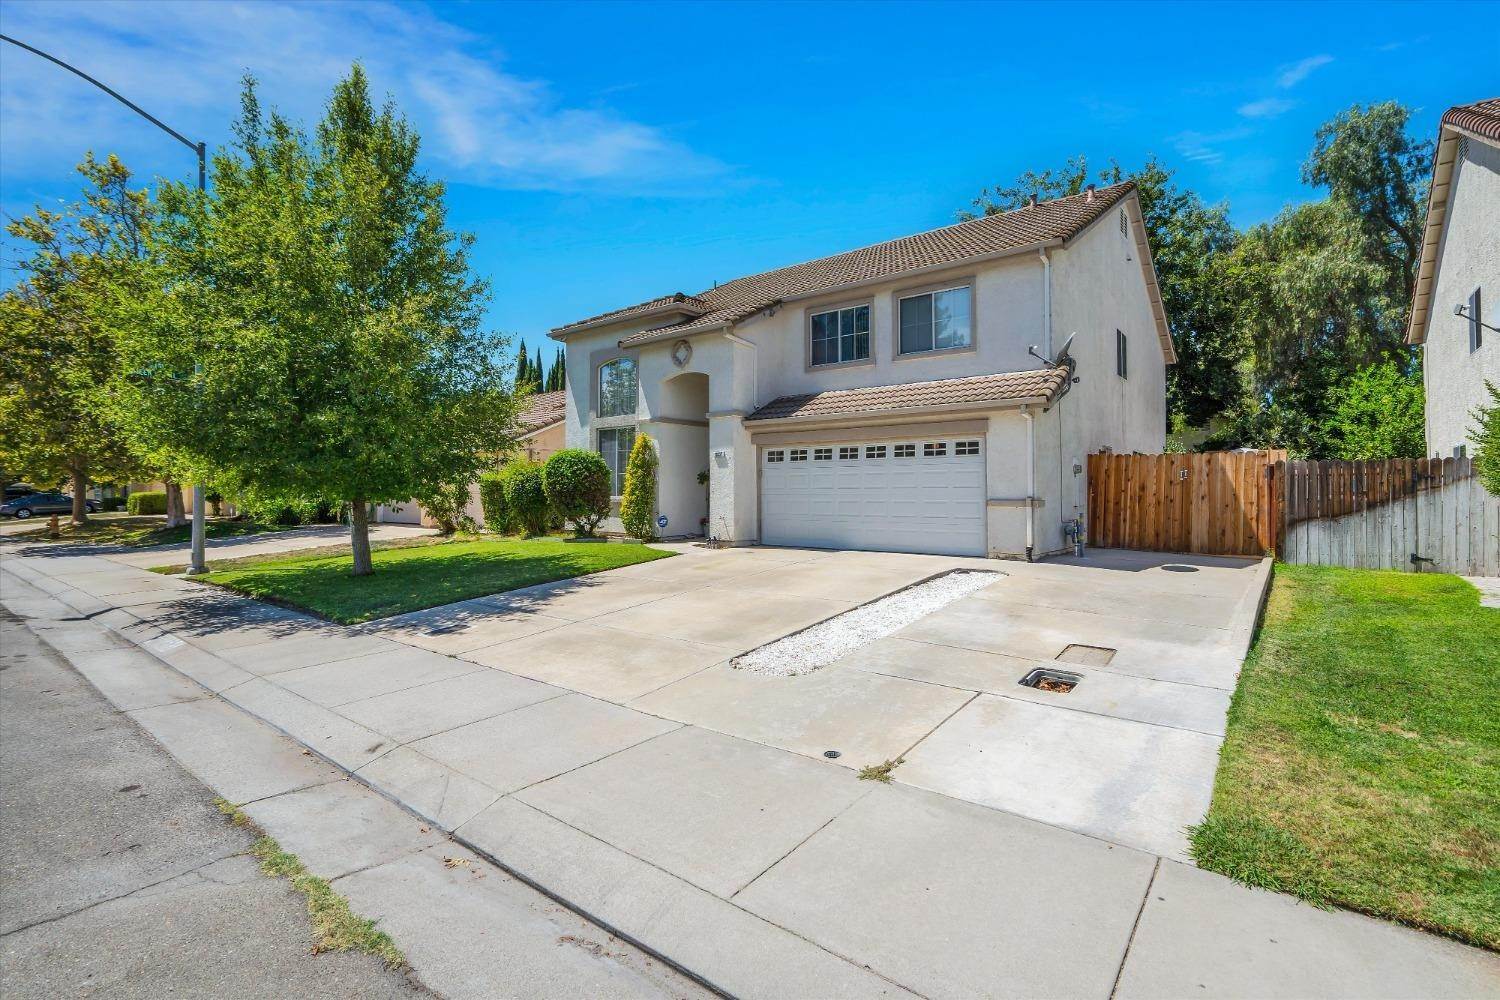 Single Family Homes for Active at 10337 River Bluff Lane Stockton, California 95209 United States